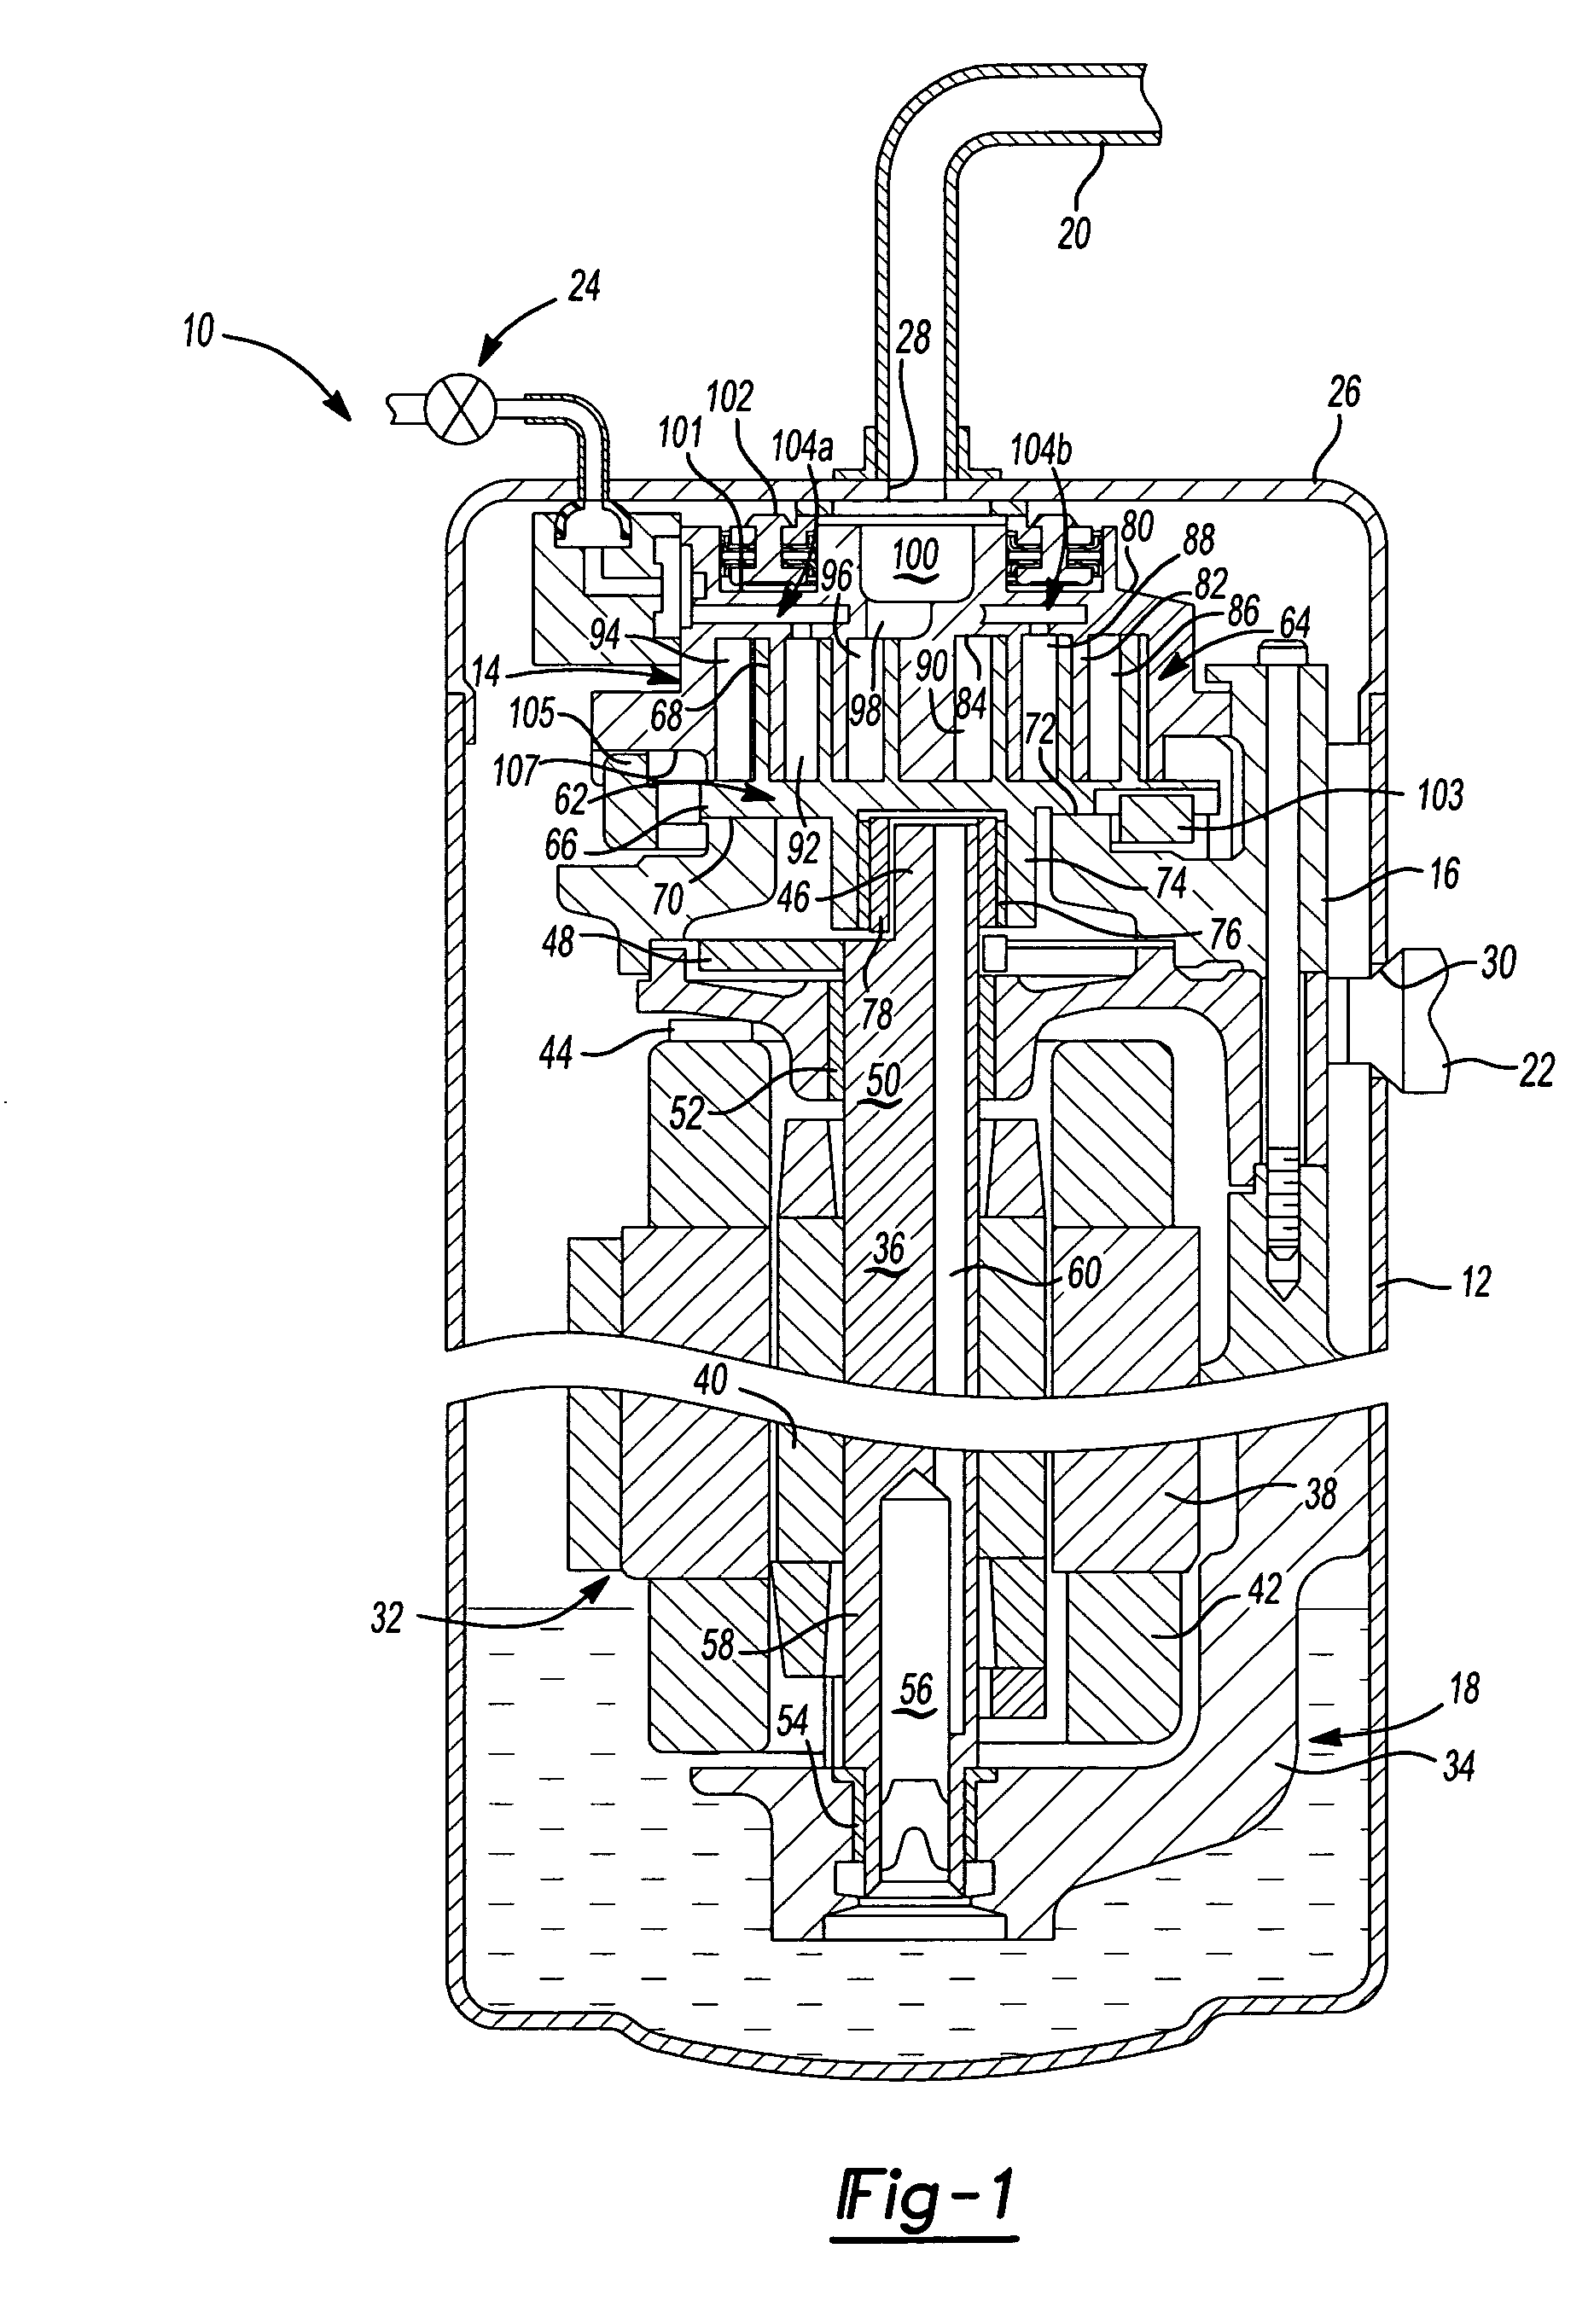 Vapor injection system for a scroll compressor